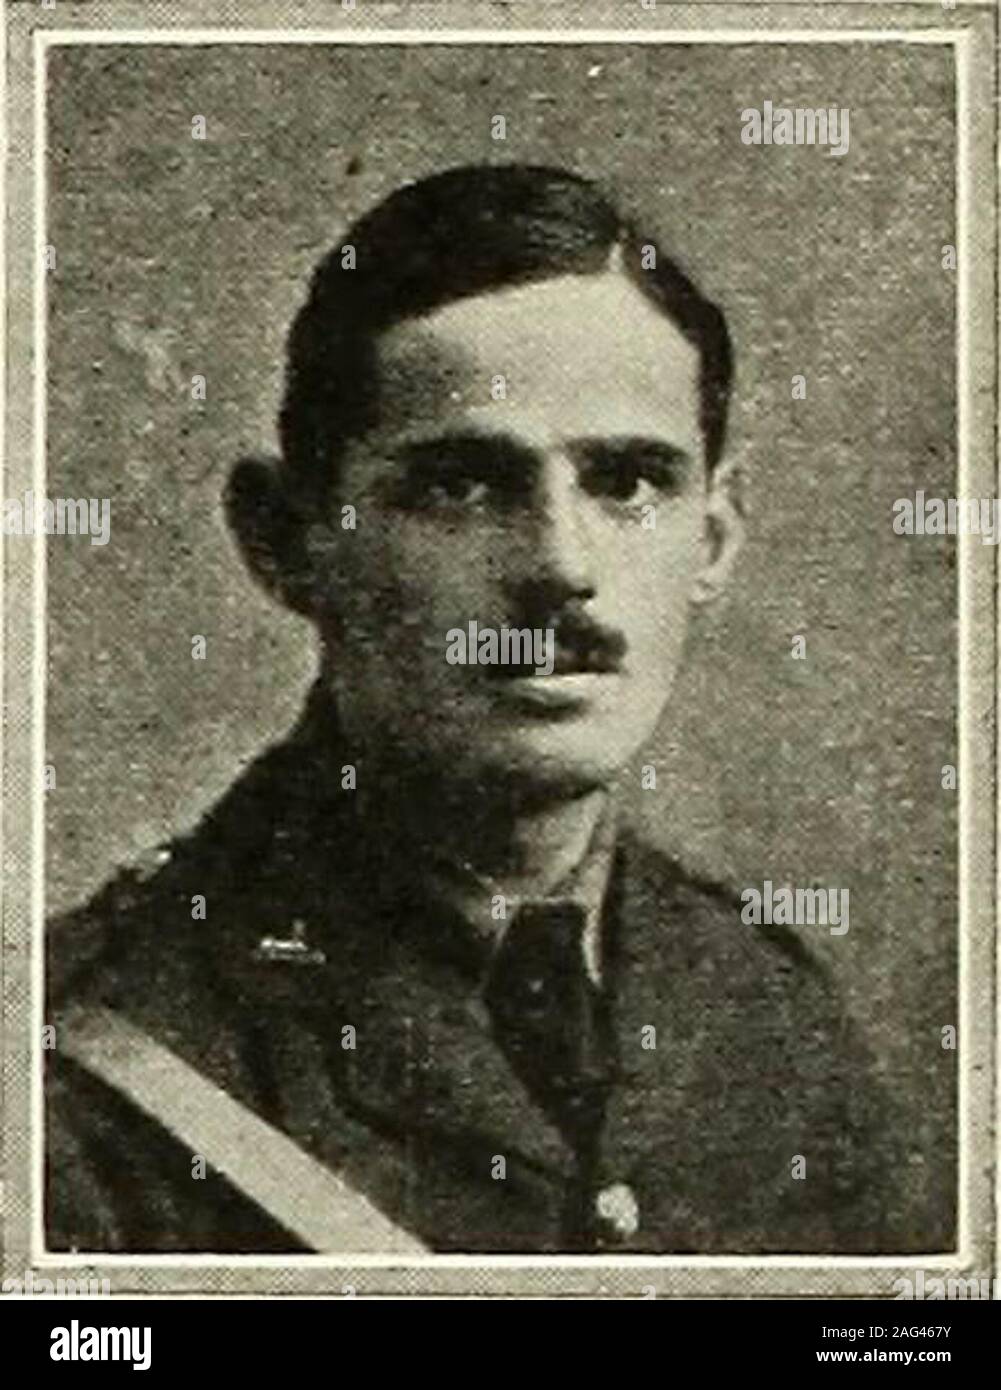 . Roll of service in the Great War, 1914-1919. A member of U Company, he was mobi-lized in August 1914, but by the end of themonth was commis-sioned in the 5th Bat-talion Gordon High-landers, with whom hewent to France in May1915. There he wasattached for duty tothe 51st DivisionalCyclist Company, andserved with it duringthe remainder of histime in France. On18 March 1916 he waskilled in the trenchesnear Arras, leaving behind him the memory of aconsiderate and devoted gentleman, with a geniusfor making friends, and with the faculty of grasp-ing readily all sides of a situation and makingthe wi Stock Photo